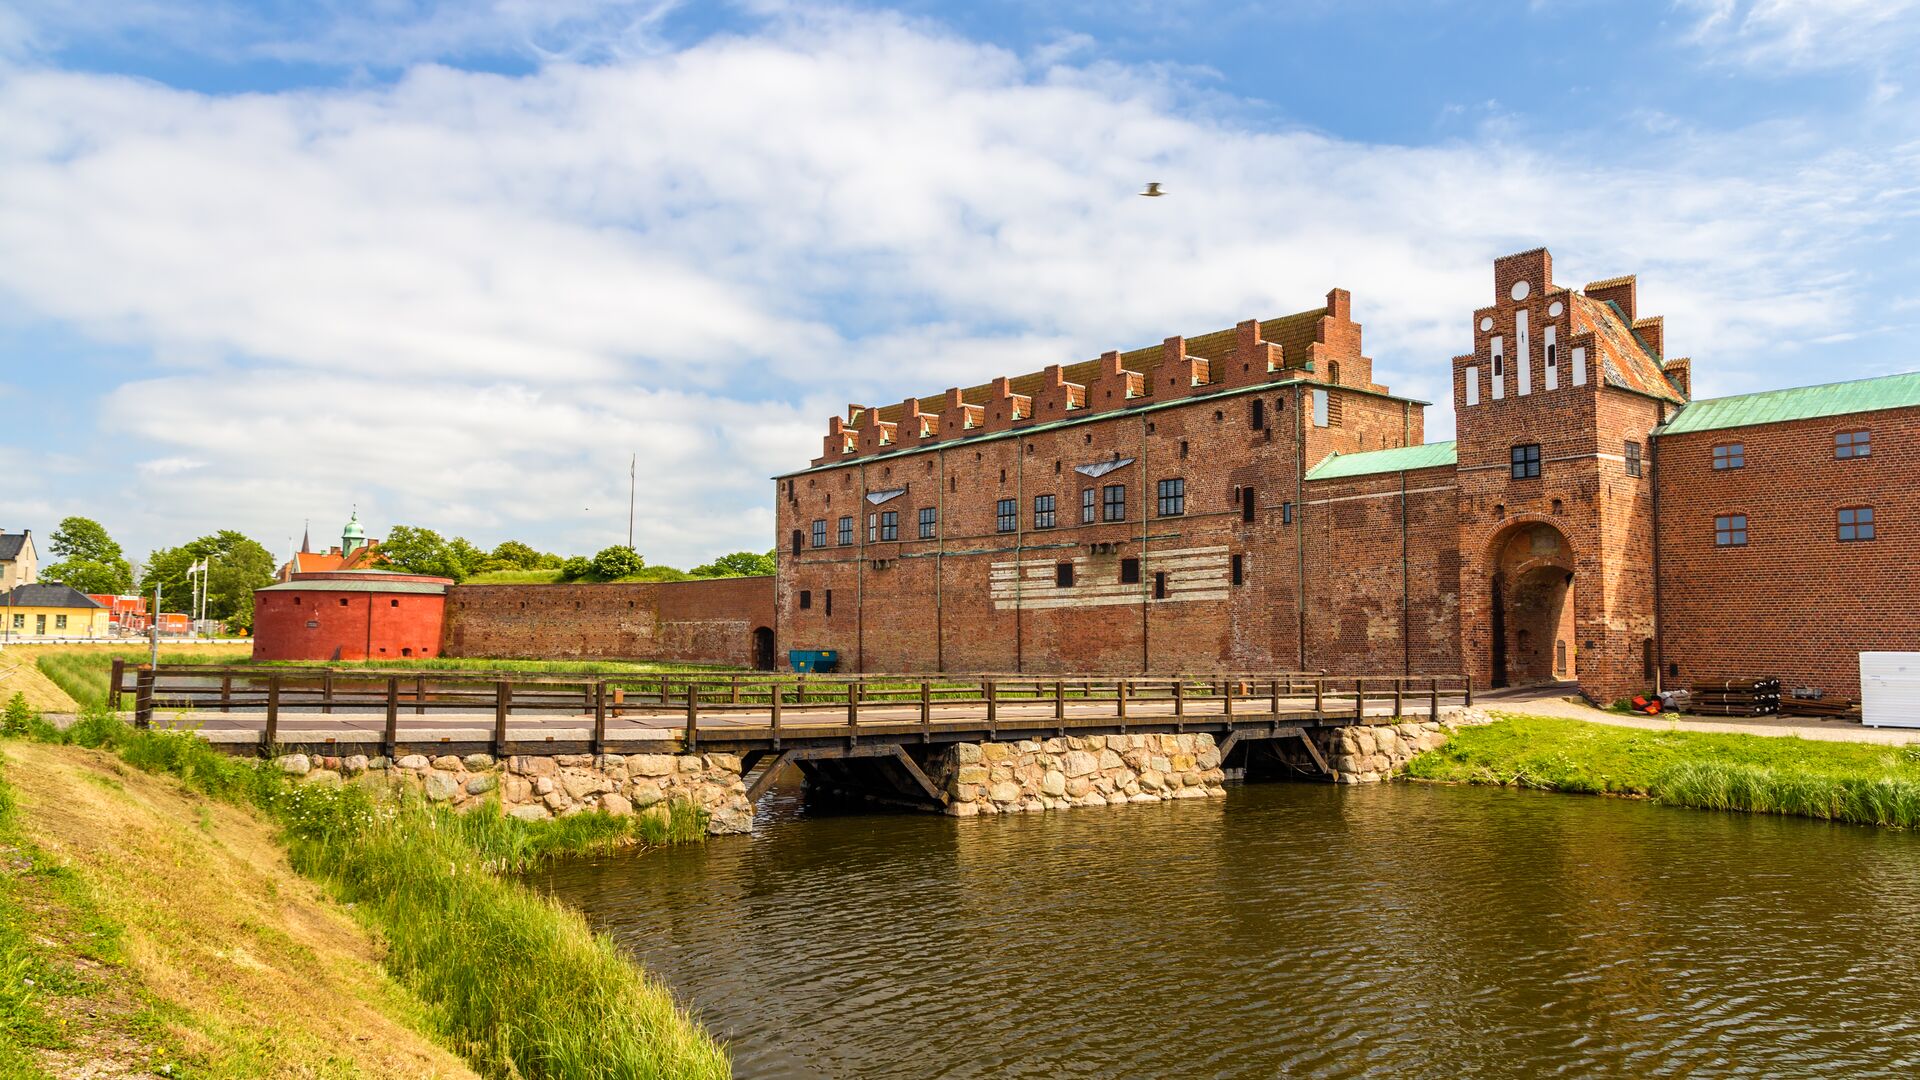 The 16th-century Malmö castle and its moat